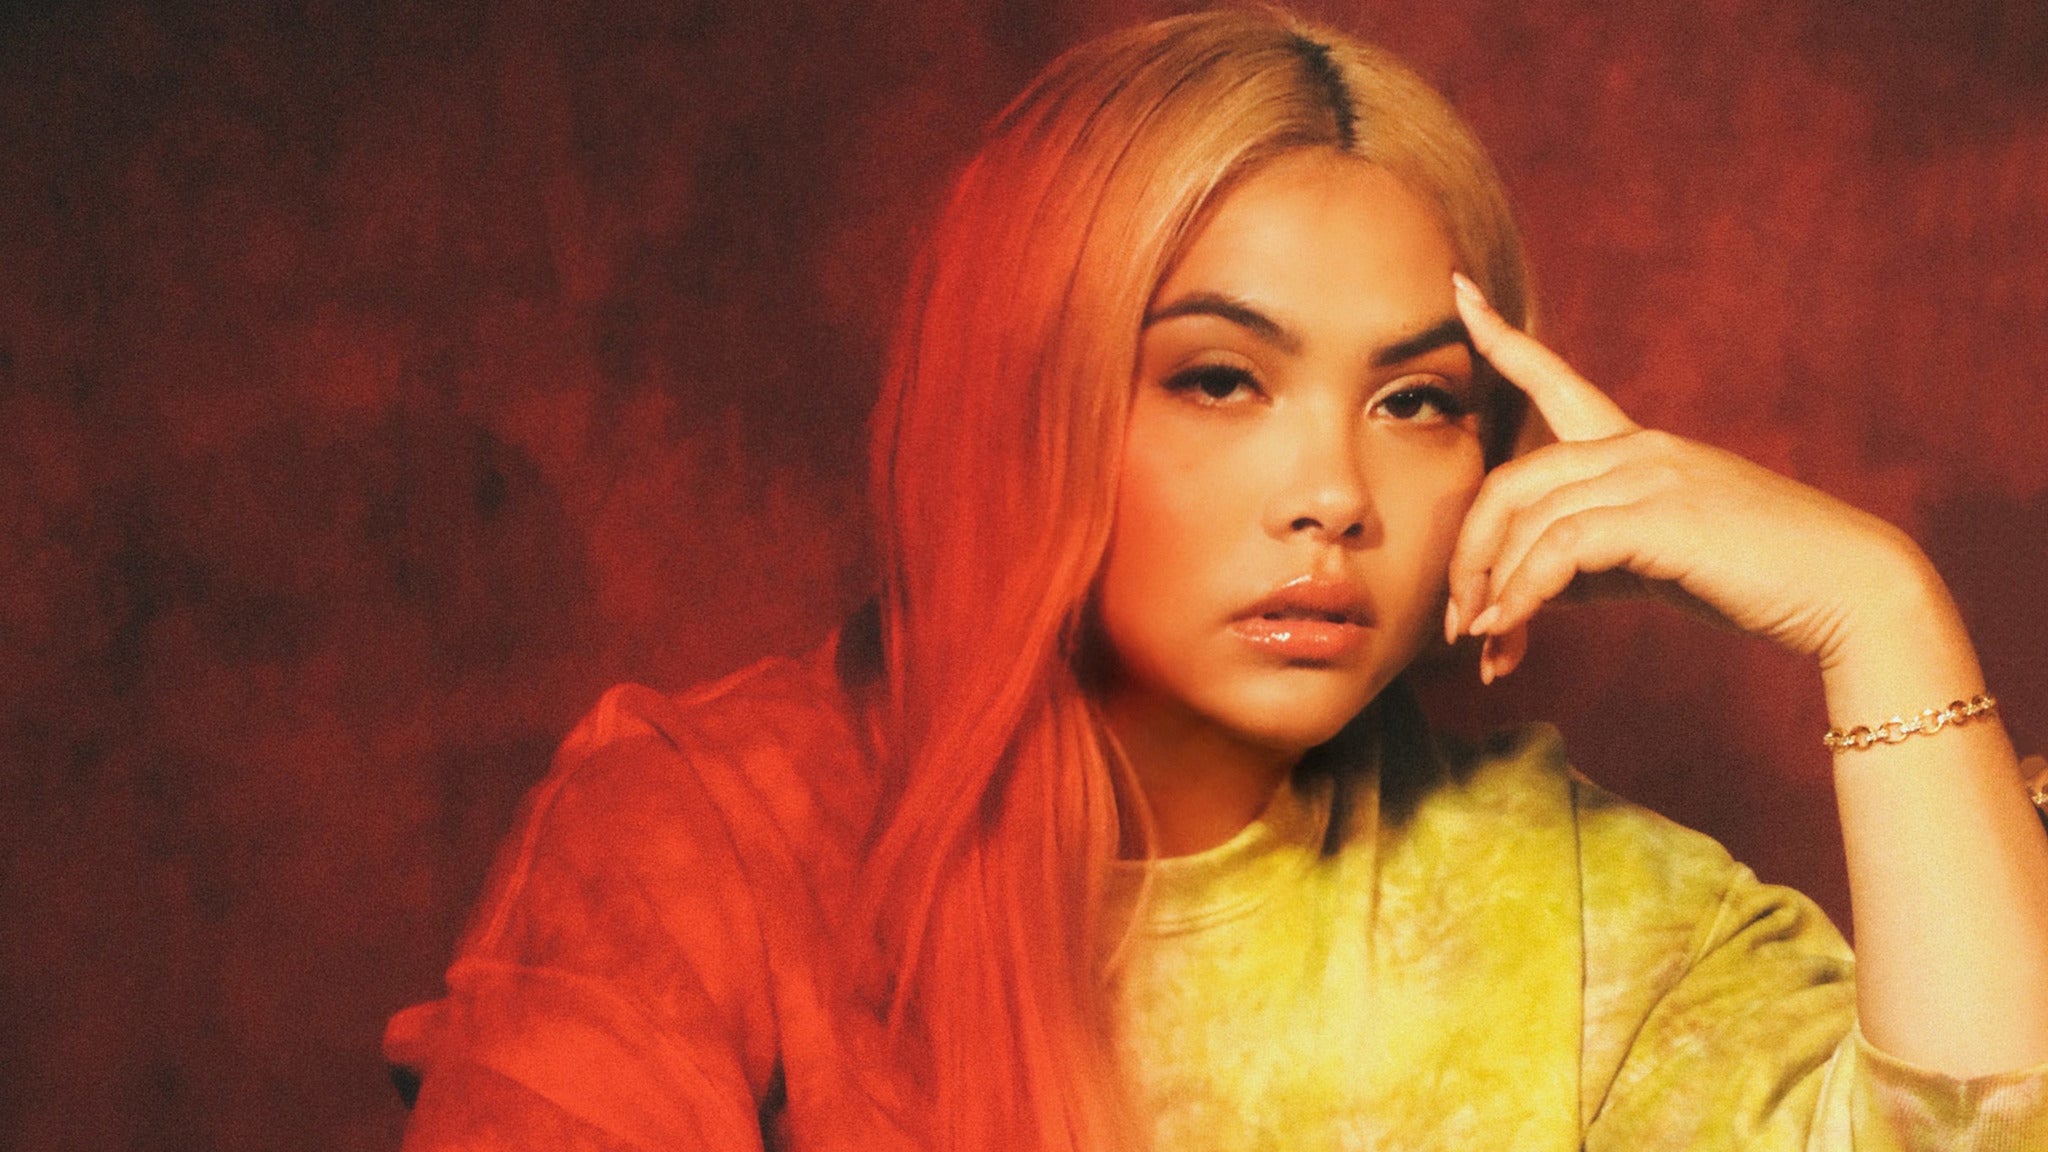 Hayley Kiyoko - Expectations North American Tour in Toronto promo photo for VIP Package Onsale presale offer code